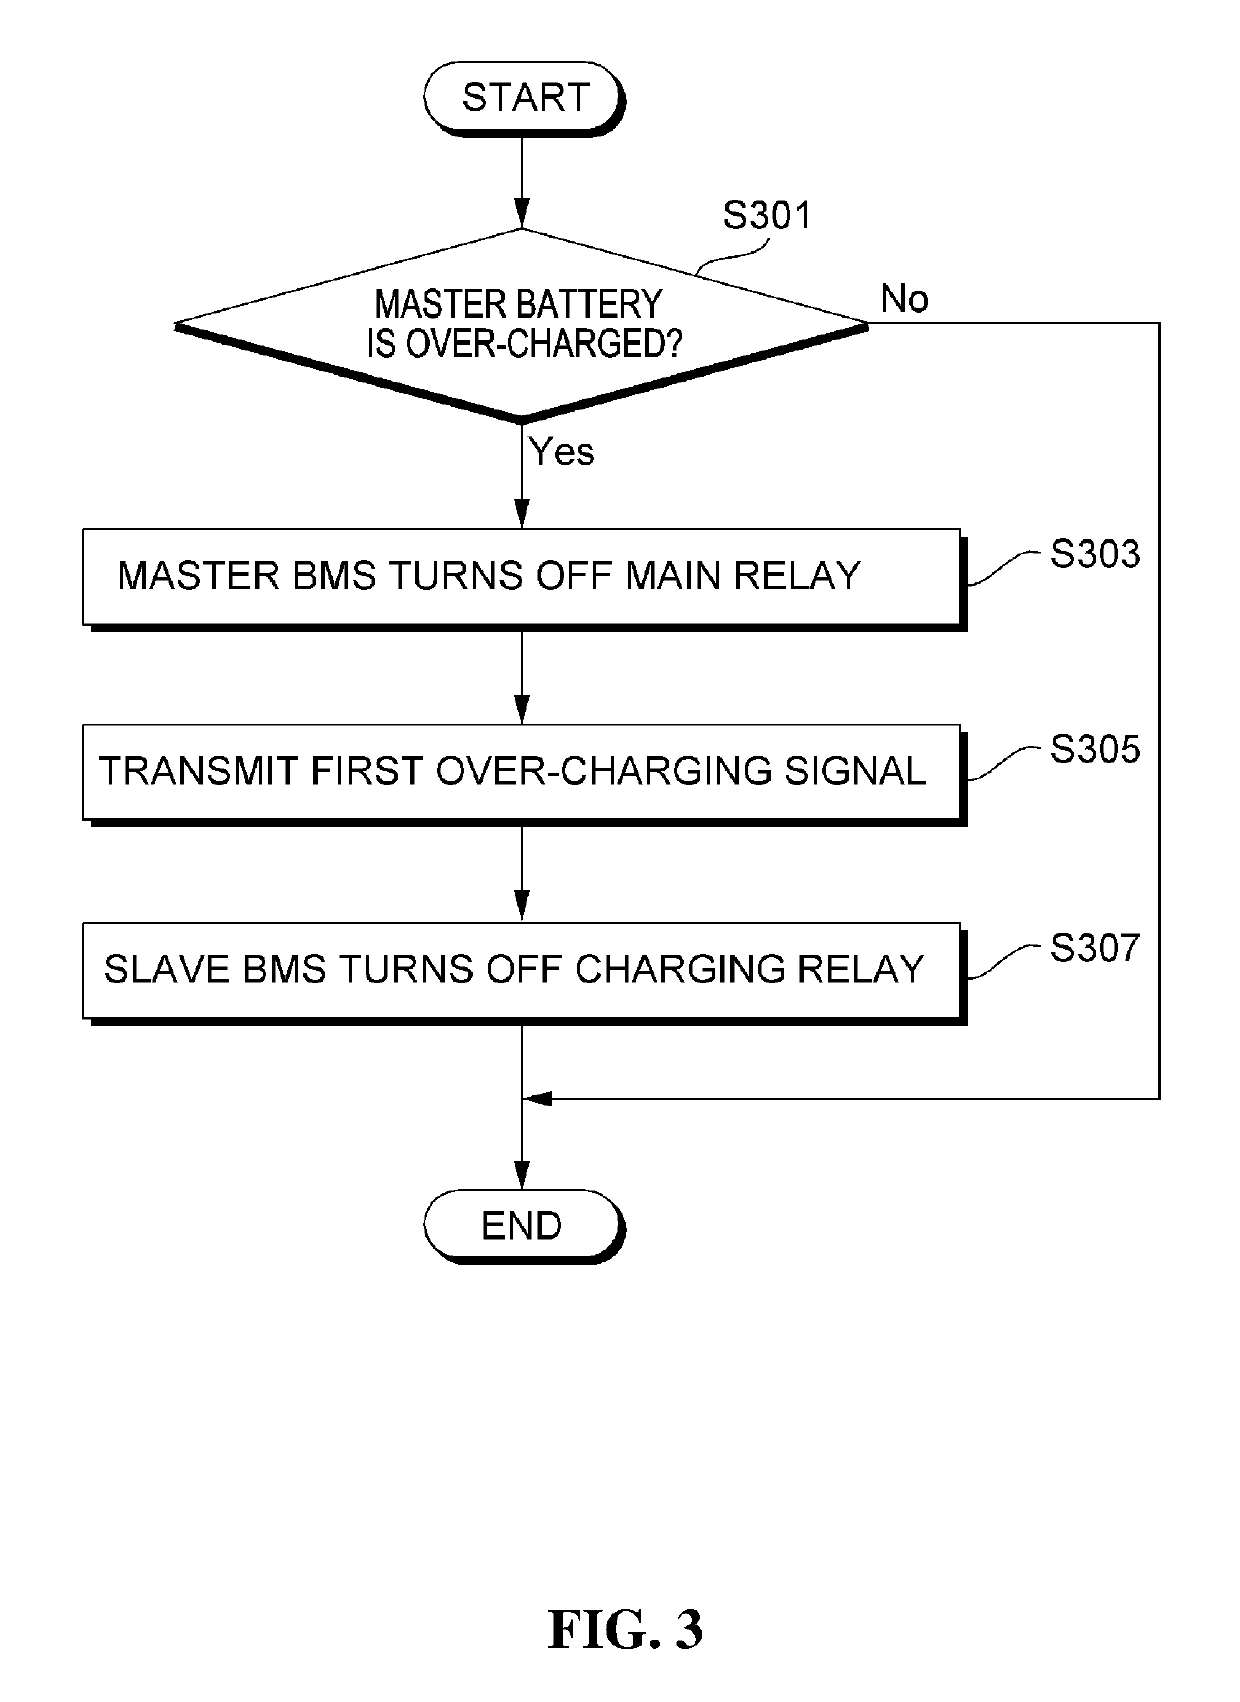 Apparatus and method for preventing over-charging of battery